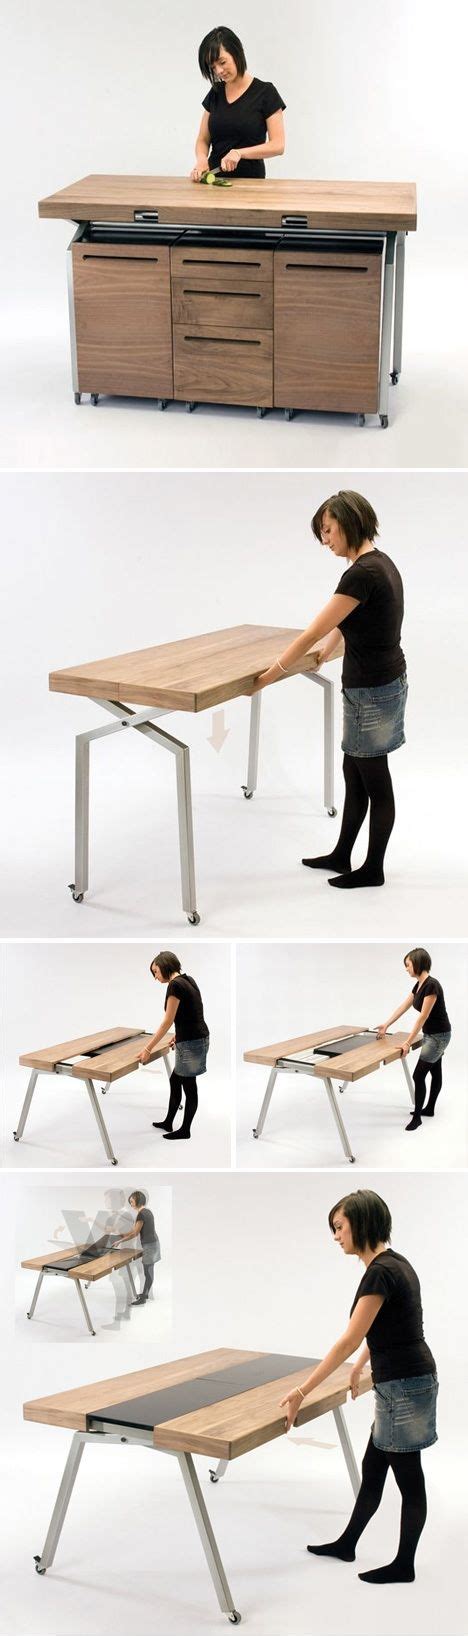 Kitchen table sets expandable is free hd wallpaper. kitchen workspace converts to dining table . dornob.com ...